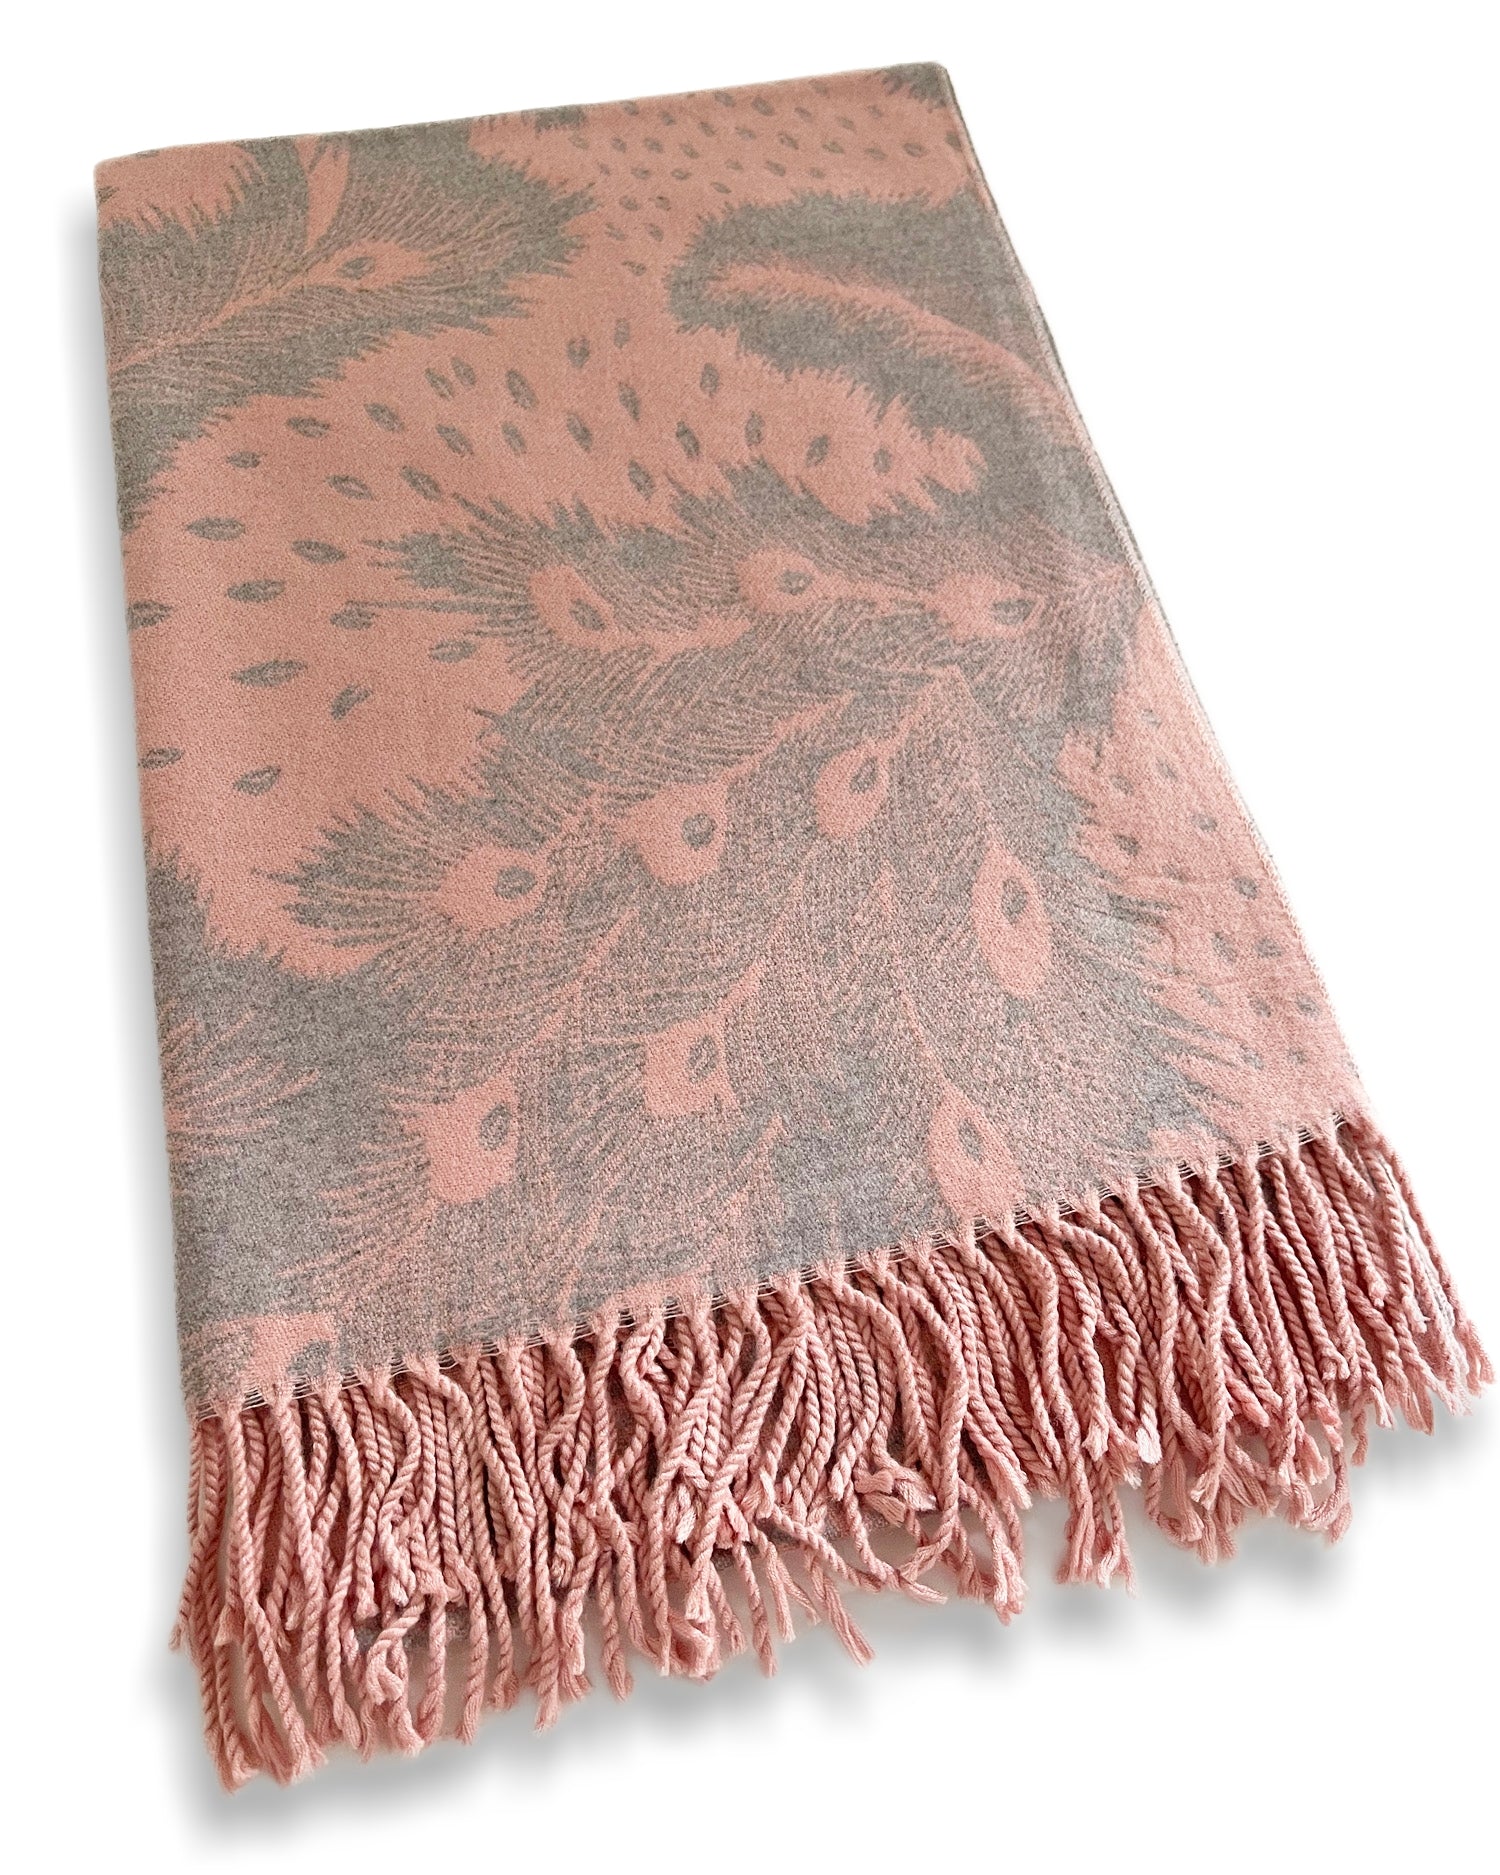 LARGE PINK CASHMERE FEATHER PRINT REVERSIBLE WINTER SHAWL BLANKET SCARF